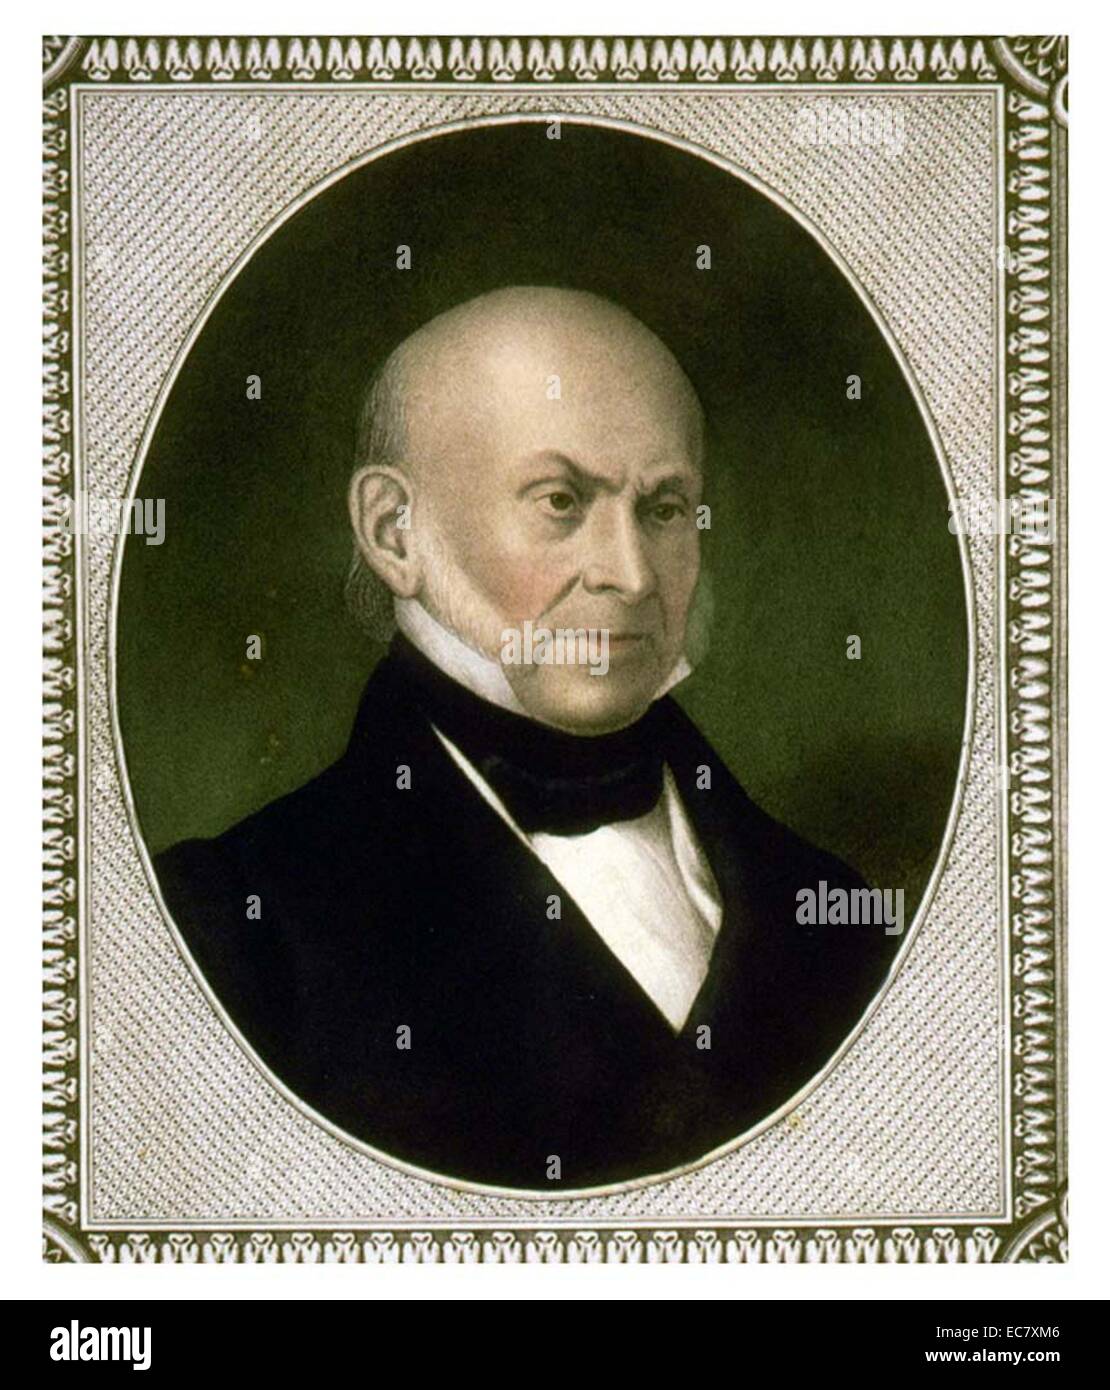 John Quincy Adams was an American statesman who served as the sixth President of the United States from 1825 to 1829. He also served as a diplomat, a Senator and member of the House of Representatives. Stock Photo